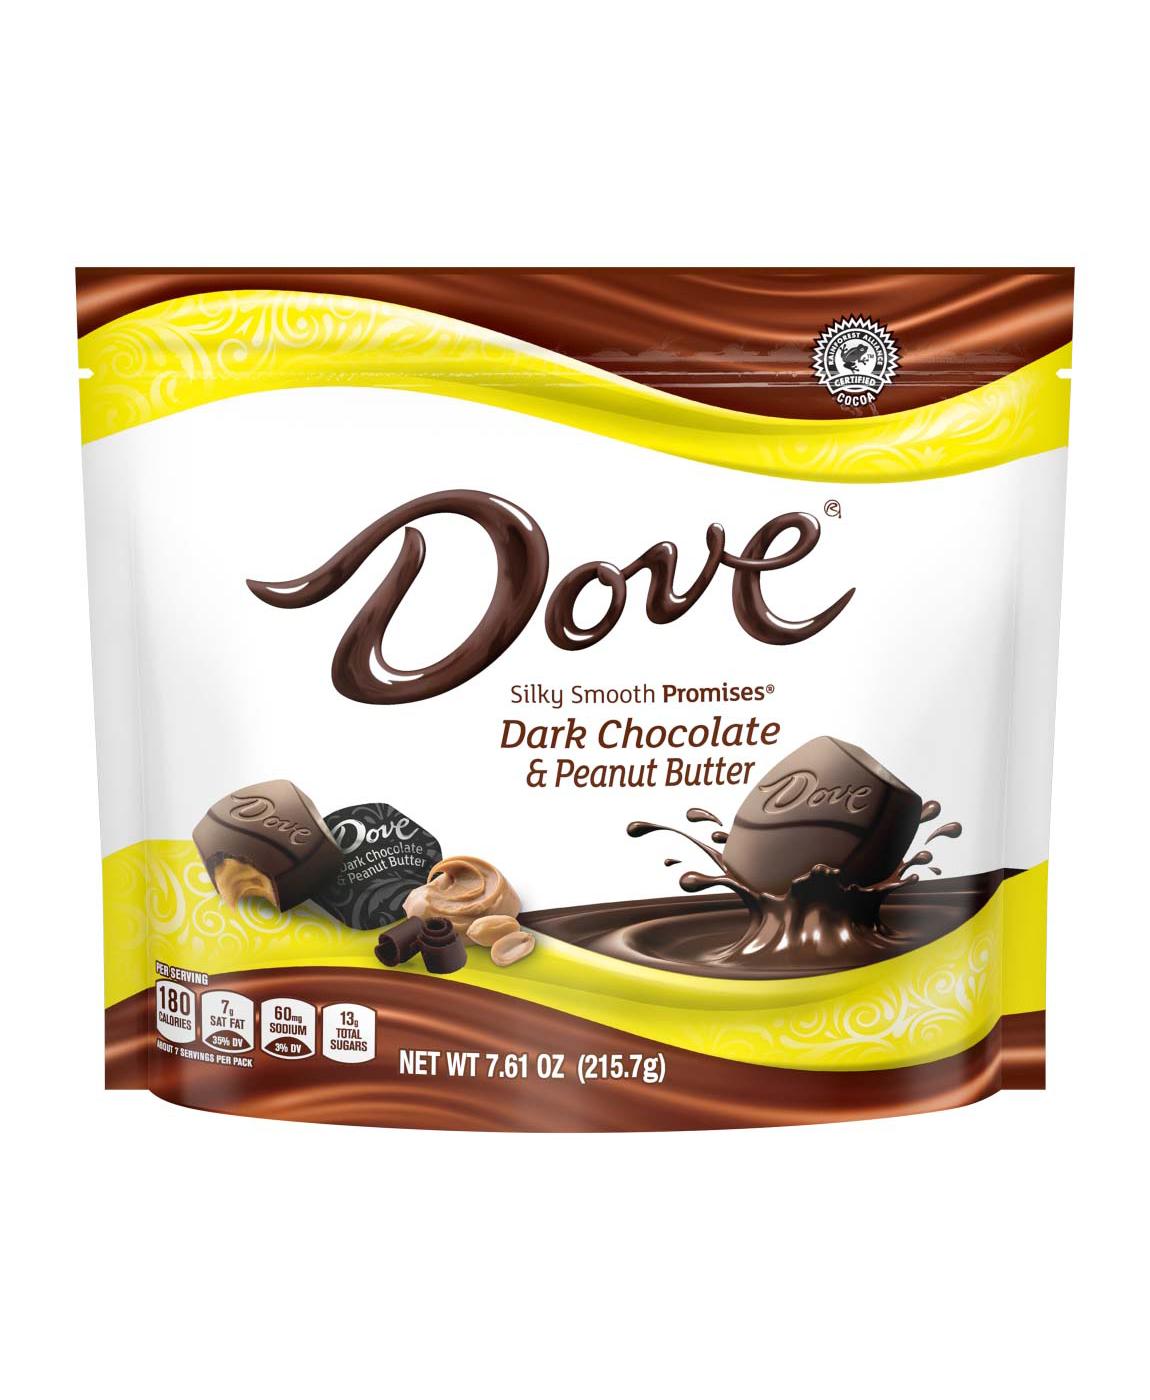 Dove Promises Dark Chocolate & Peanut Butter Candy; image 1 of 7